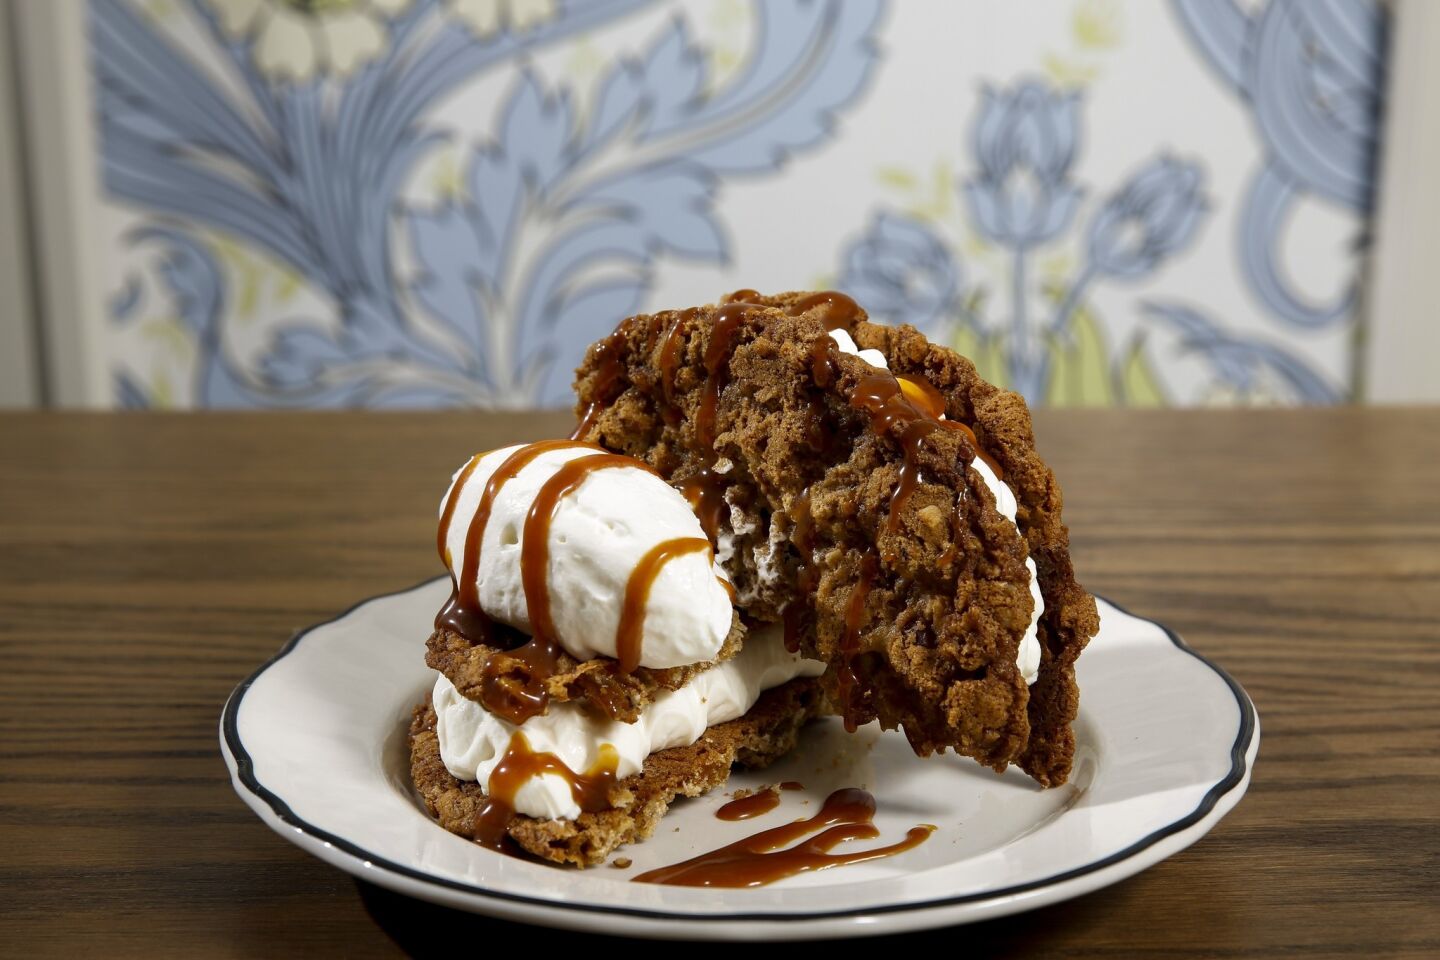 Crispy, chewy, golden raisin oatmeal cookie sandwich, with mascarpone filling, for $8.